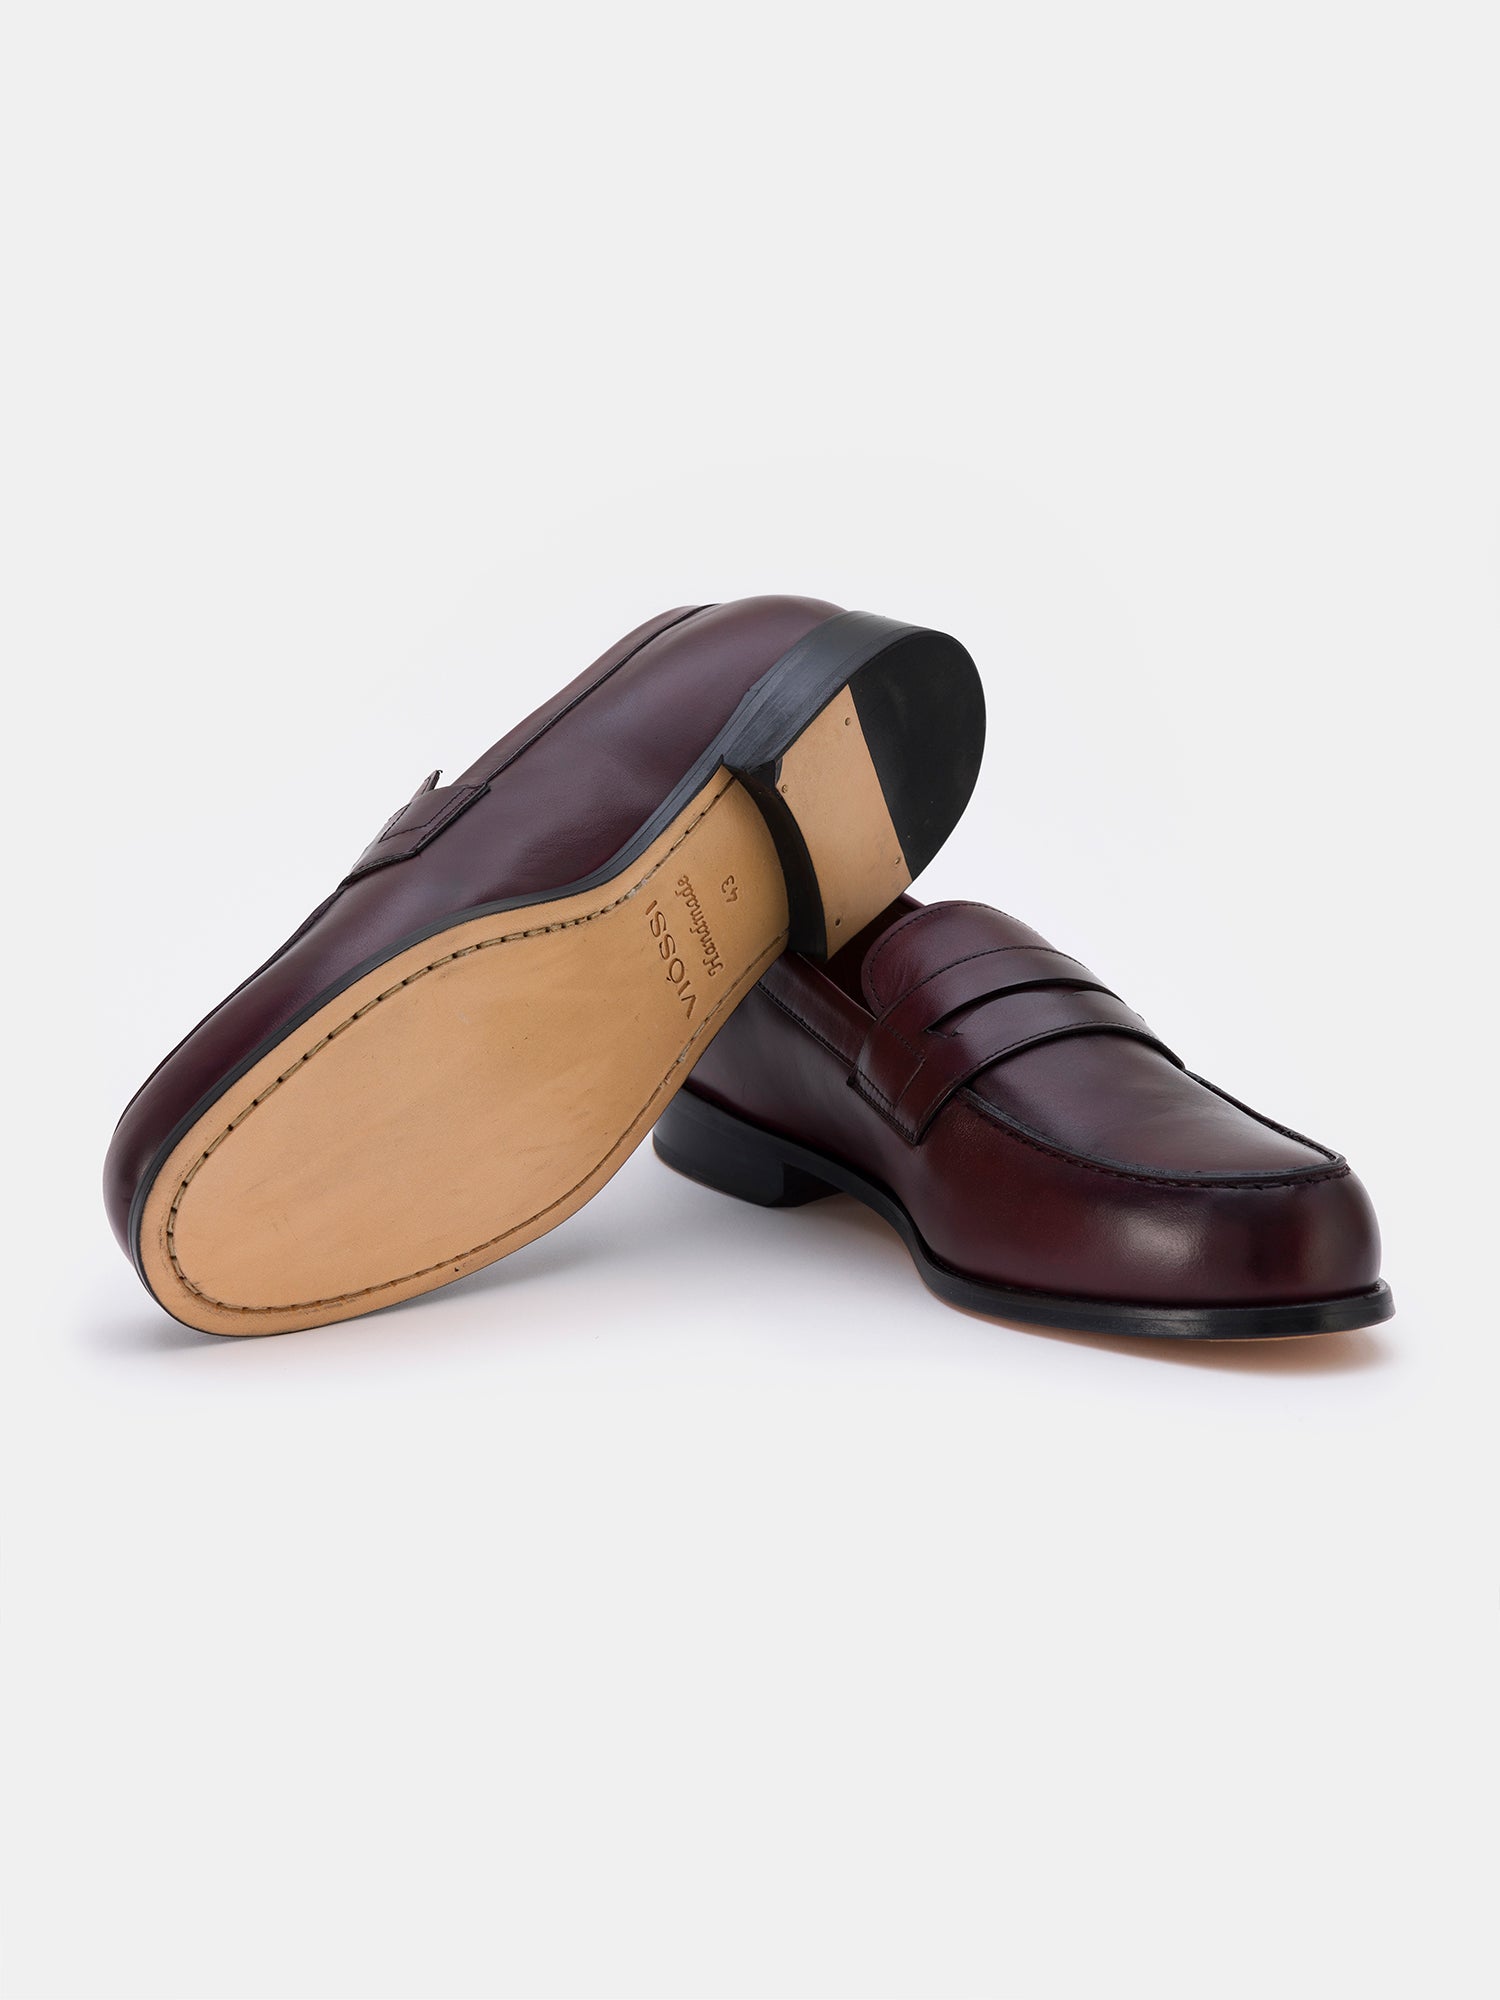 Bordeaux Leather Penny Loafers